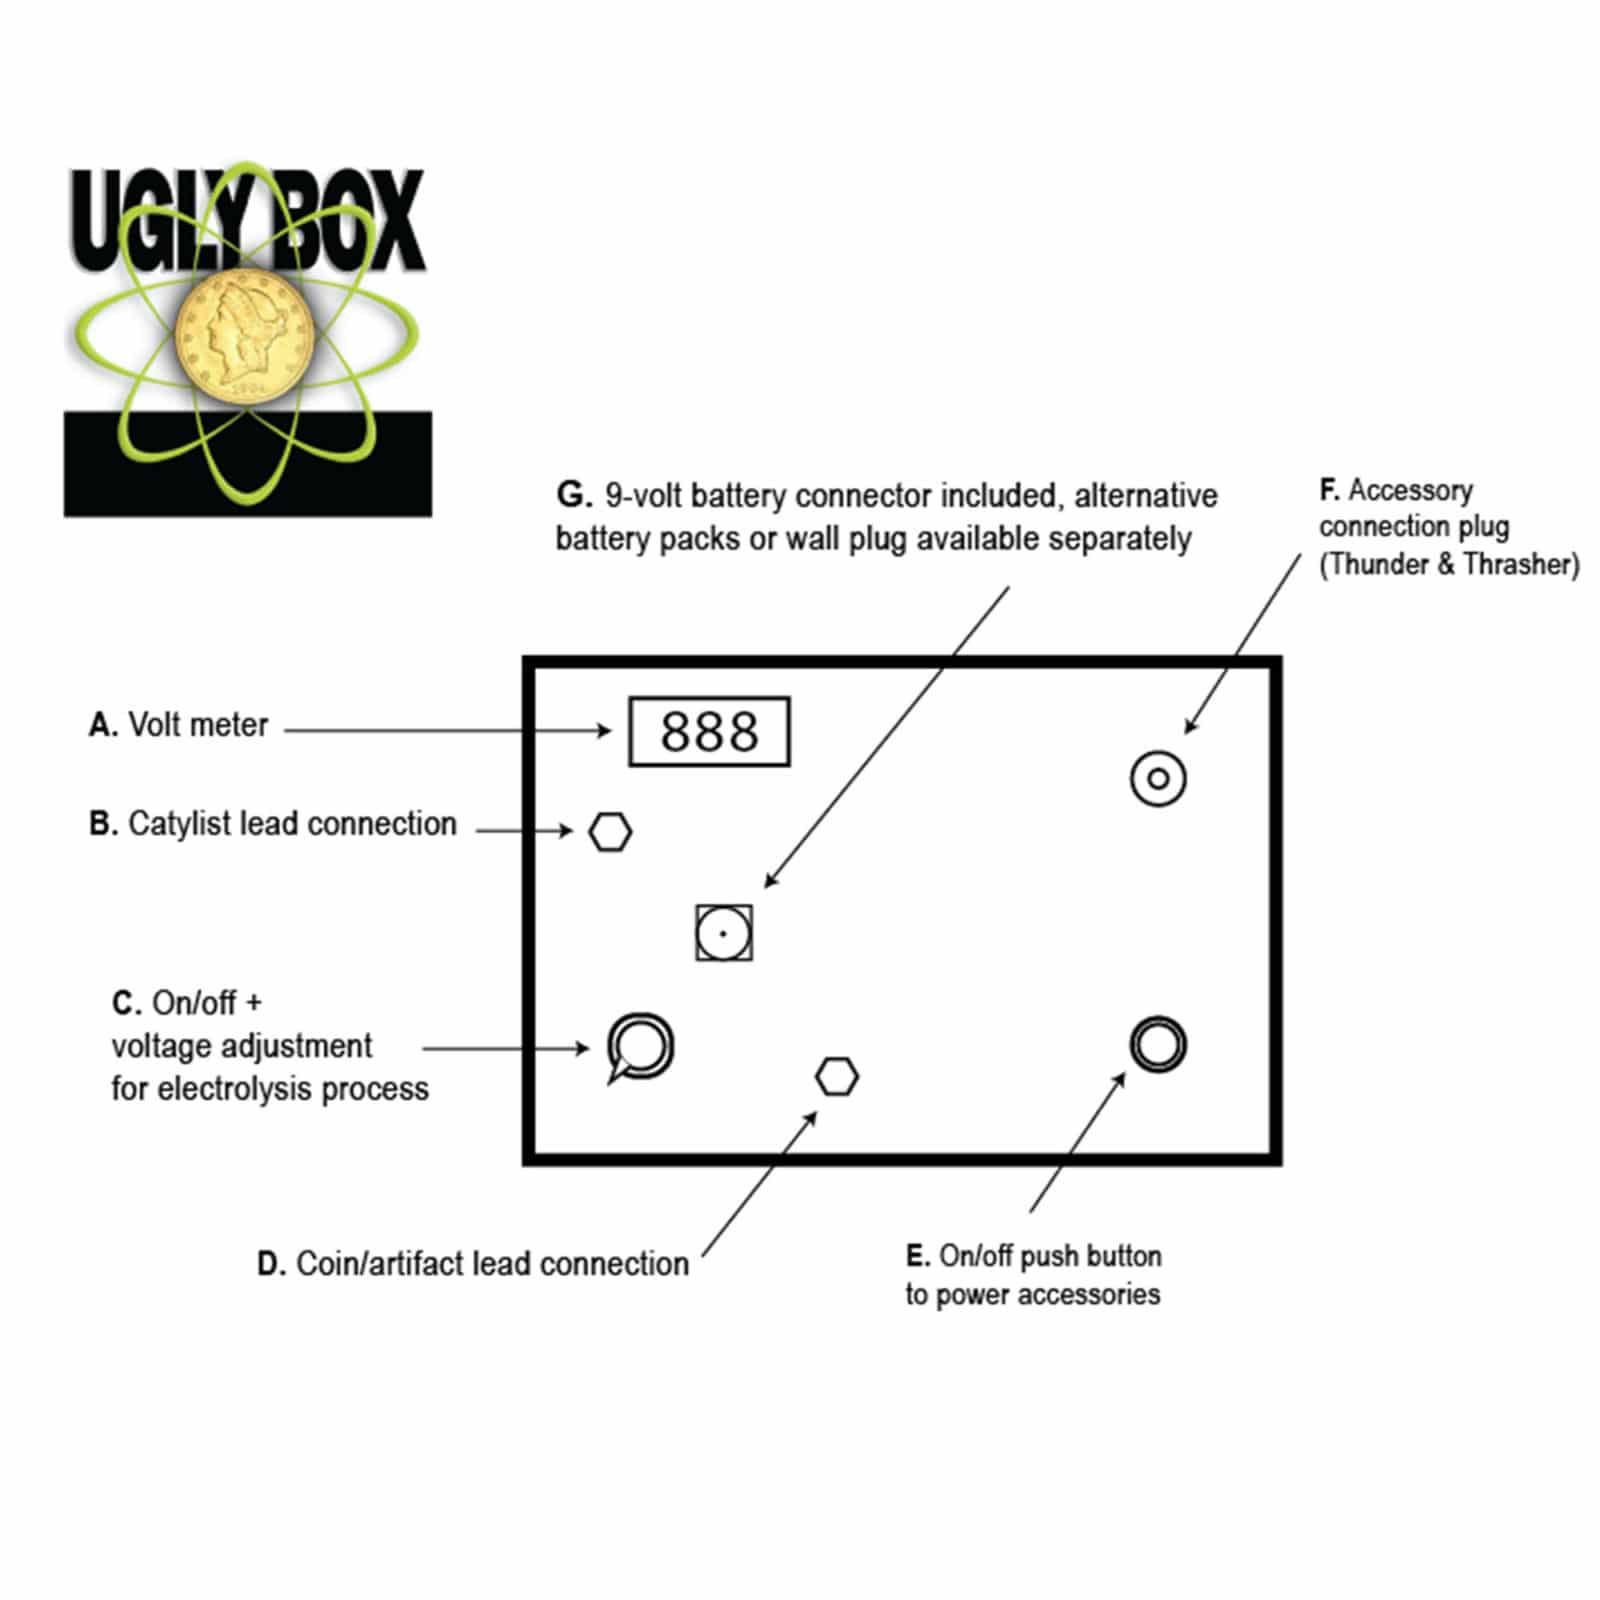 Ugly Box Electrolysis Kit for Relics and Coins Diagram